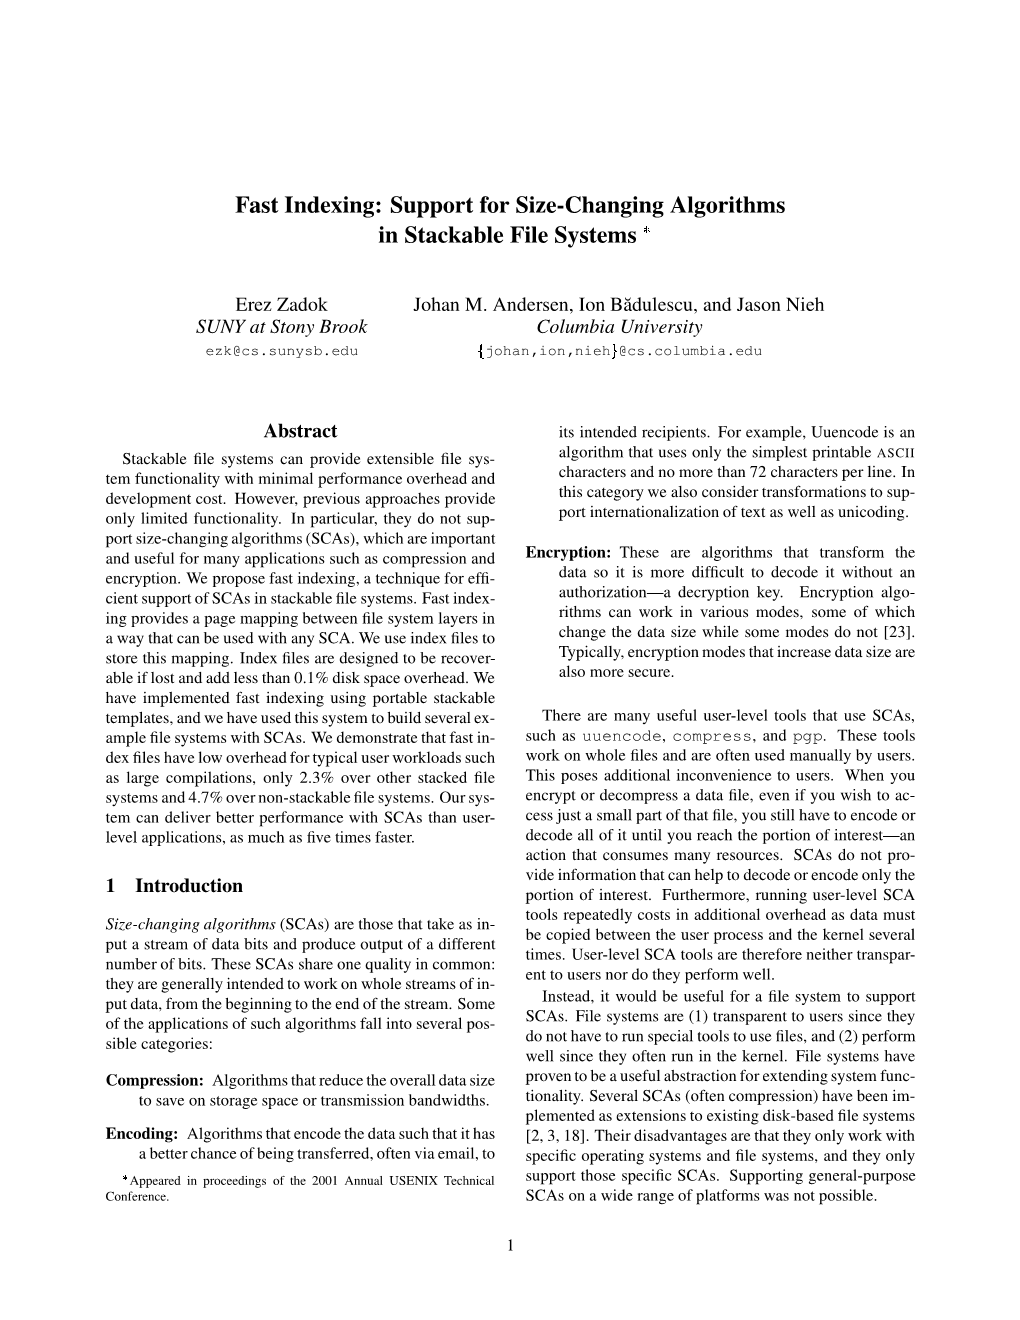 Support for Size-Changing Algorithms in Stackable File Systems